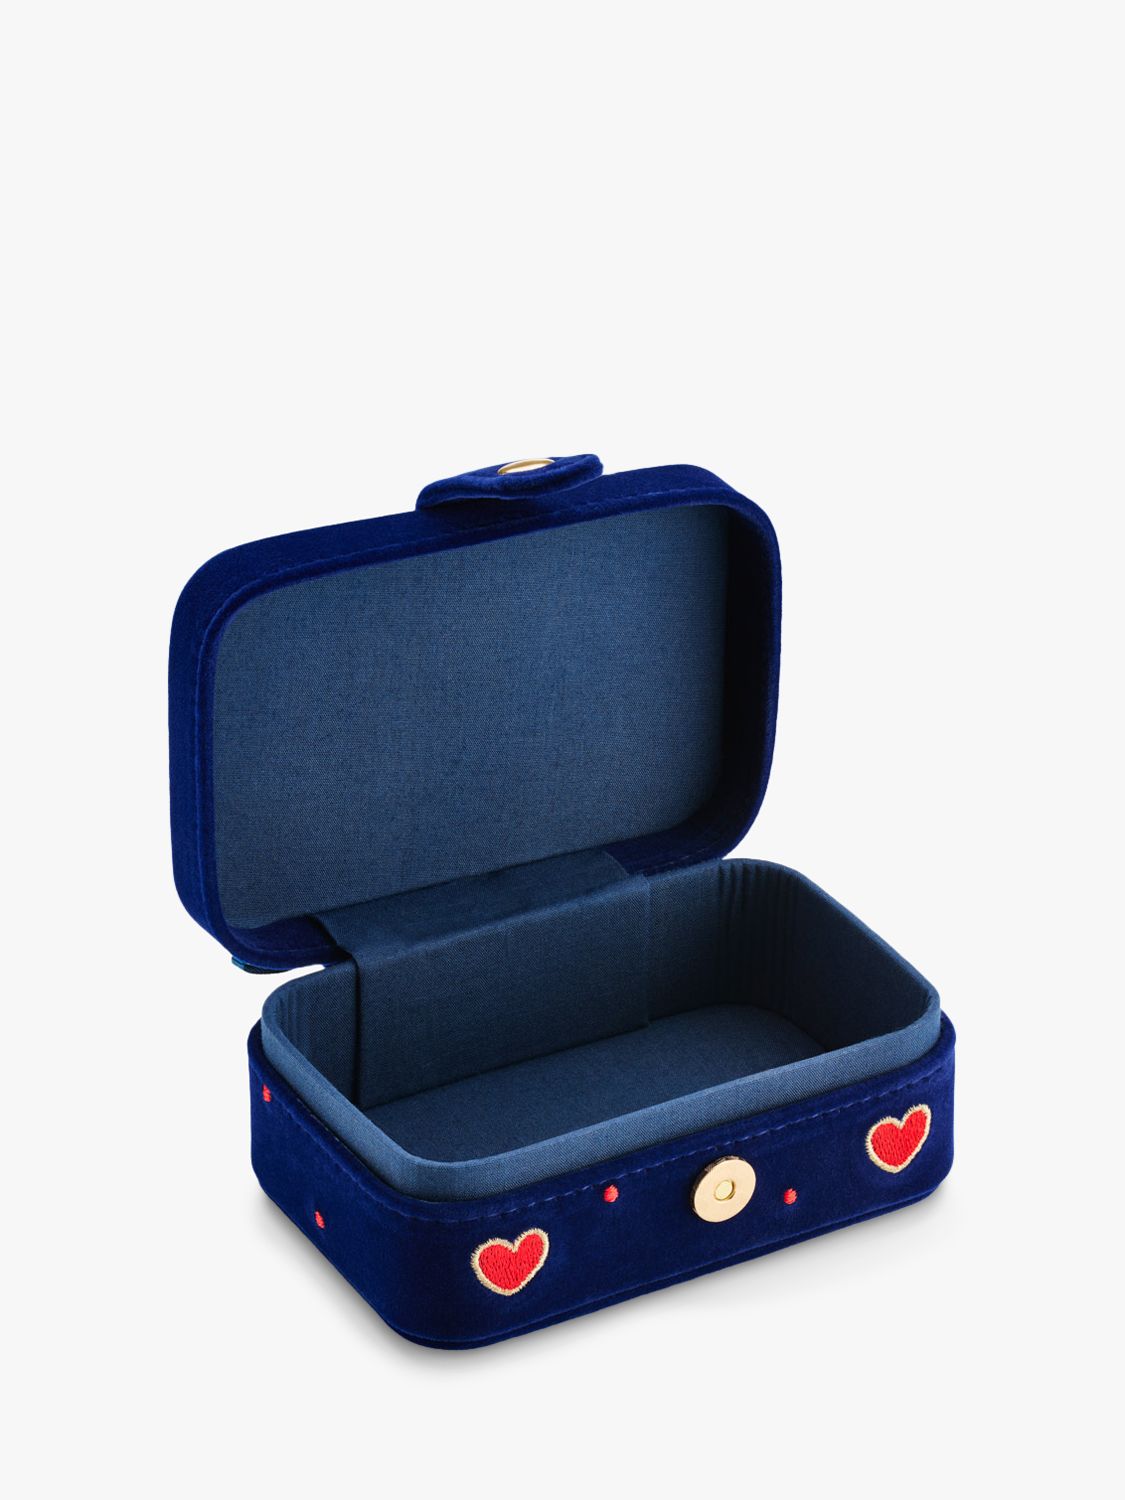 Buy Stych Kids' Initial Fringe Embroidered Jewellery Box, Blue Online at johnlewis.com